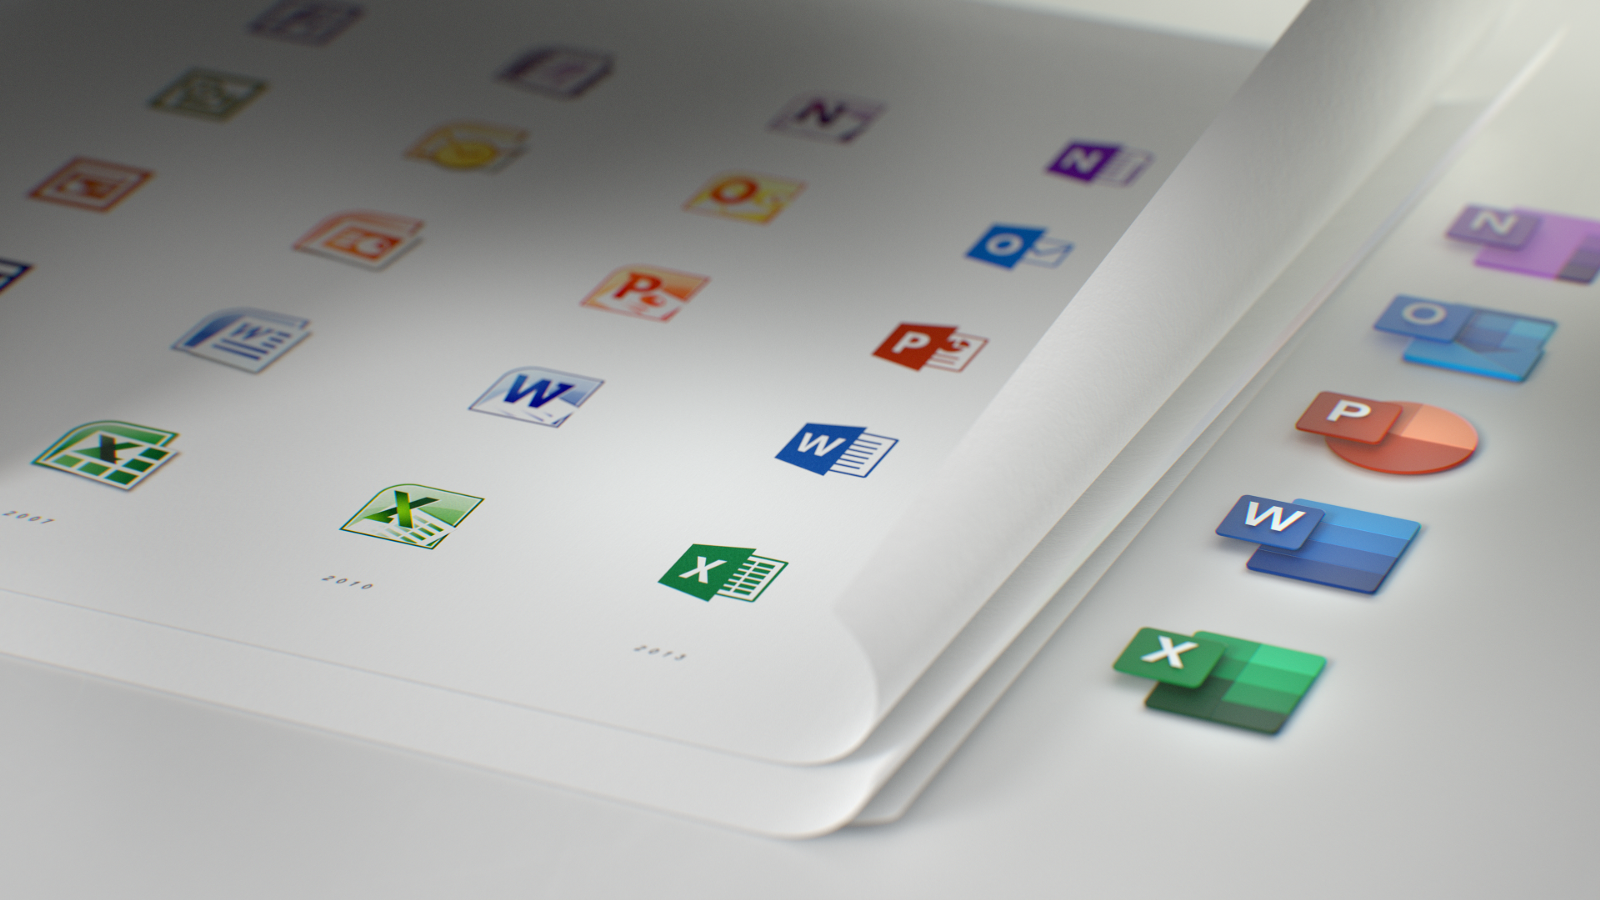 Microsoft redesigns Office 365 Icons to embrace a modern look